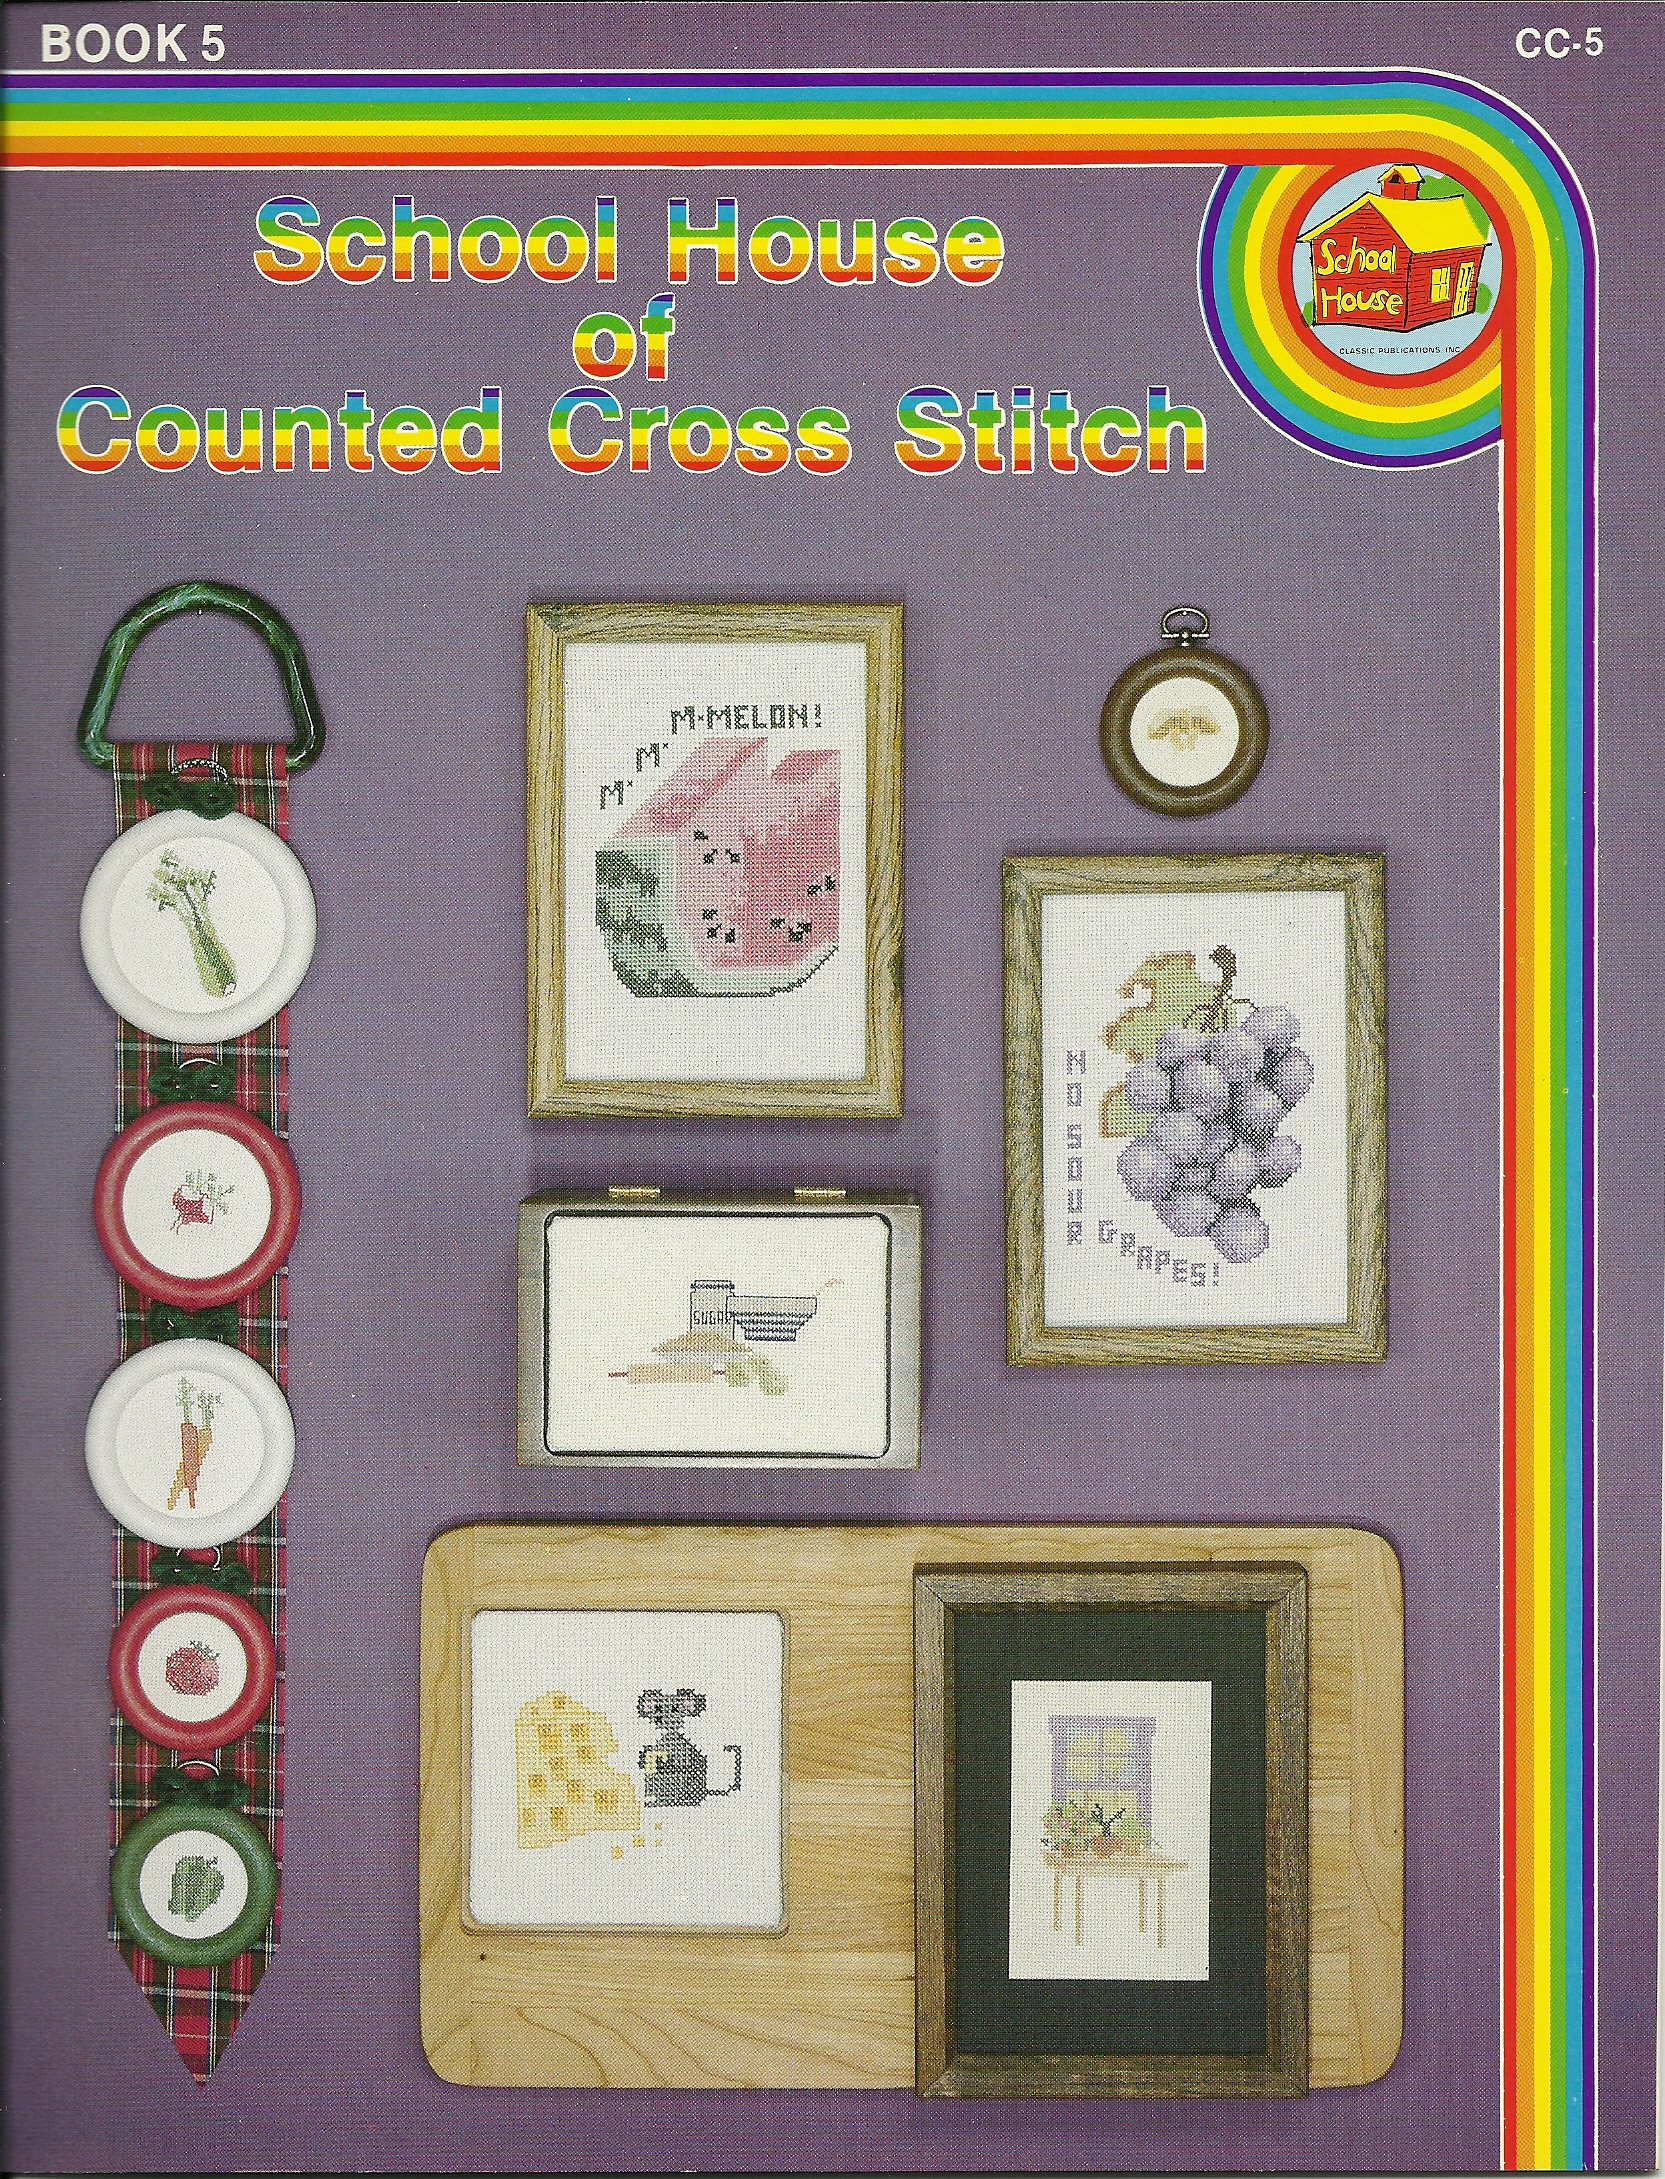 School House of Counted Cross Stitch  Book 5